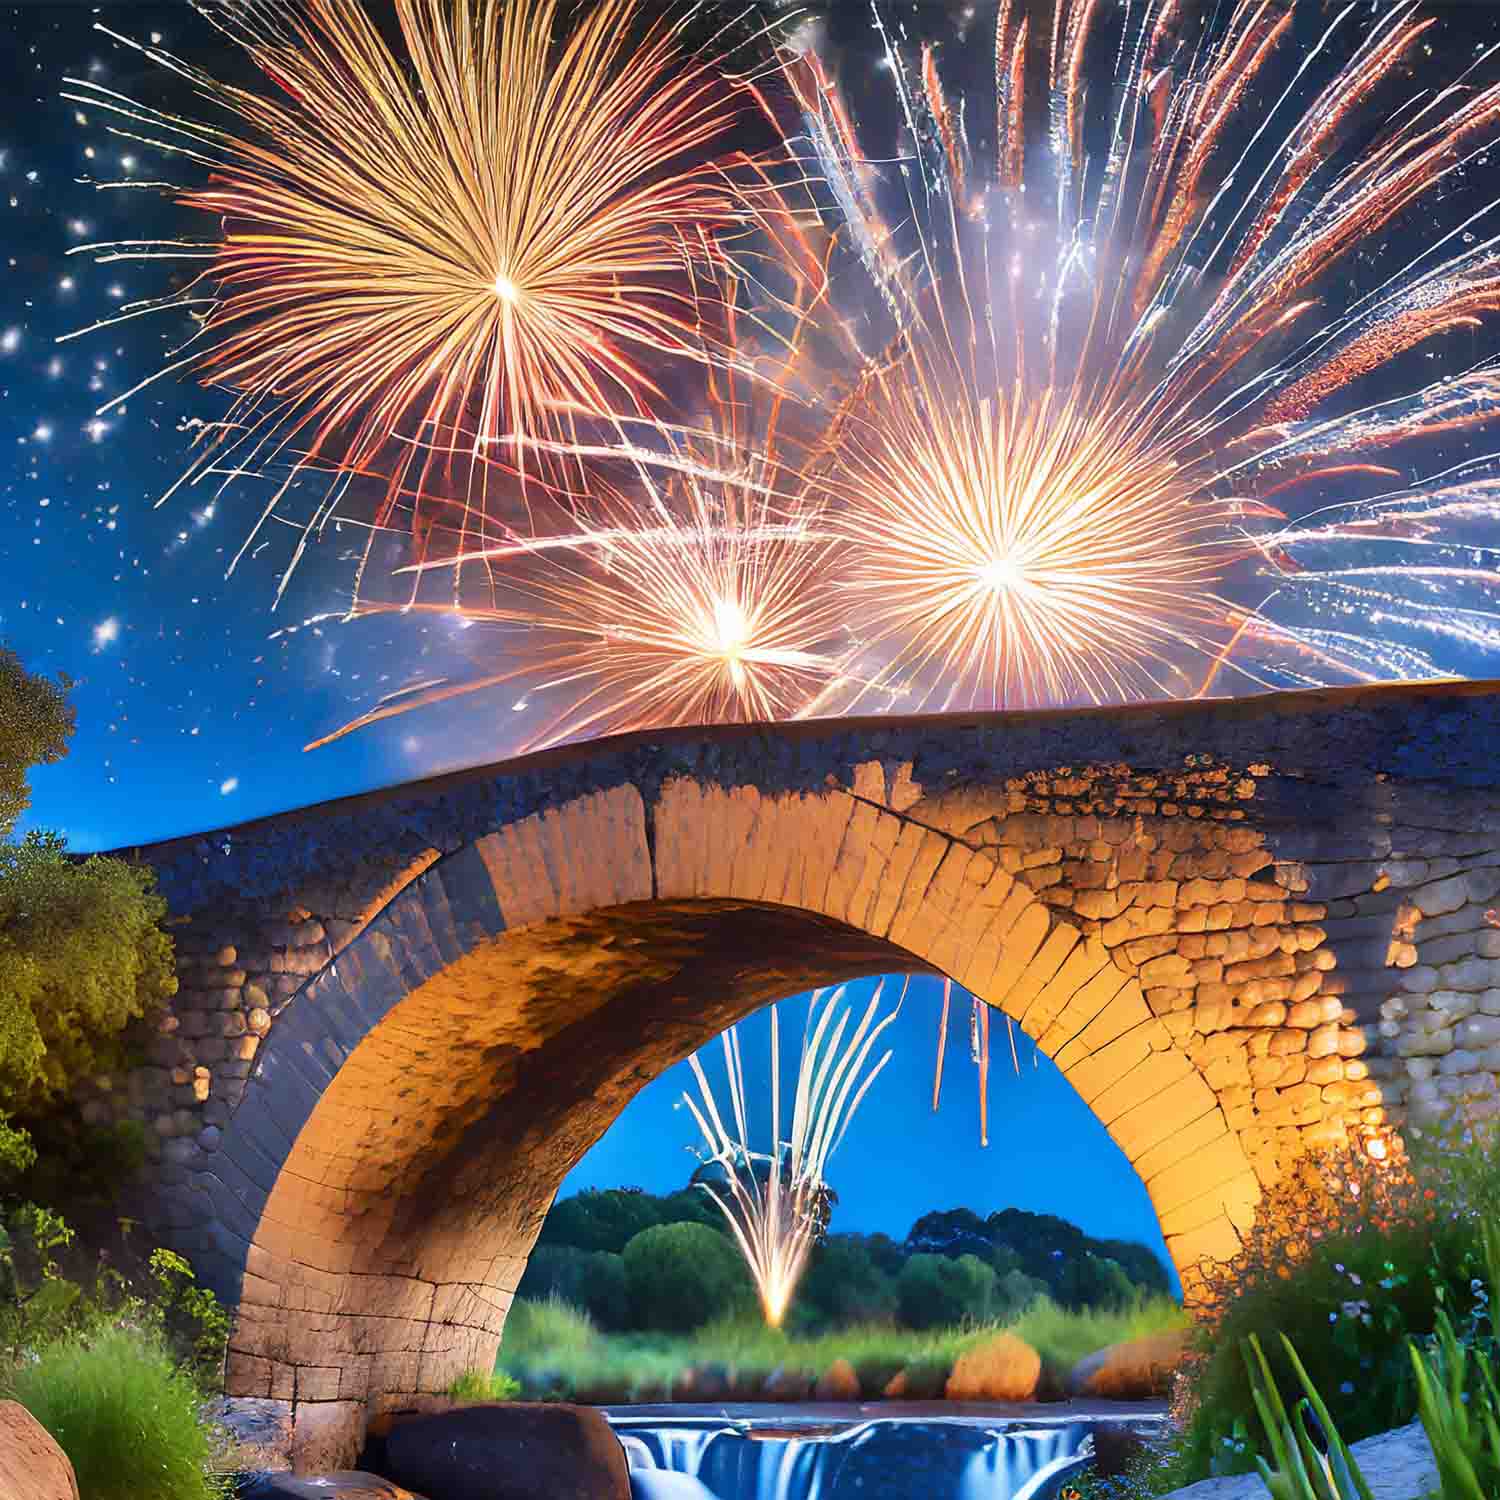 Artist concept of stone arch bridge with fireworks display in background.